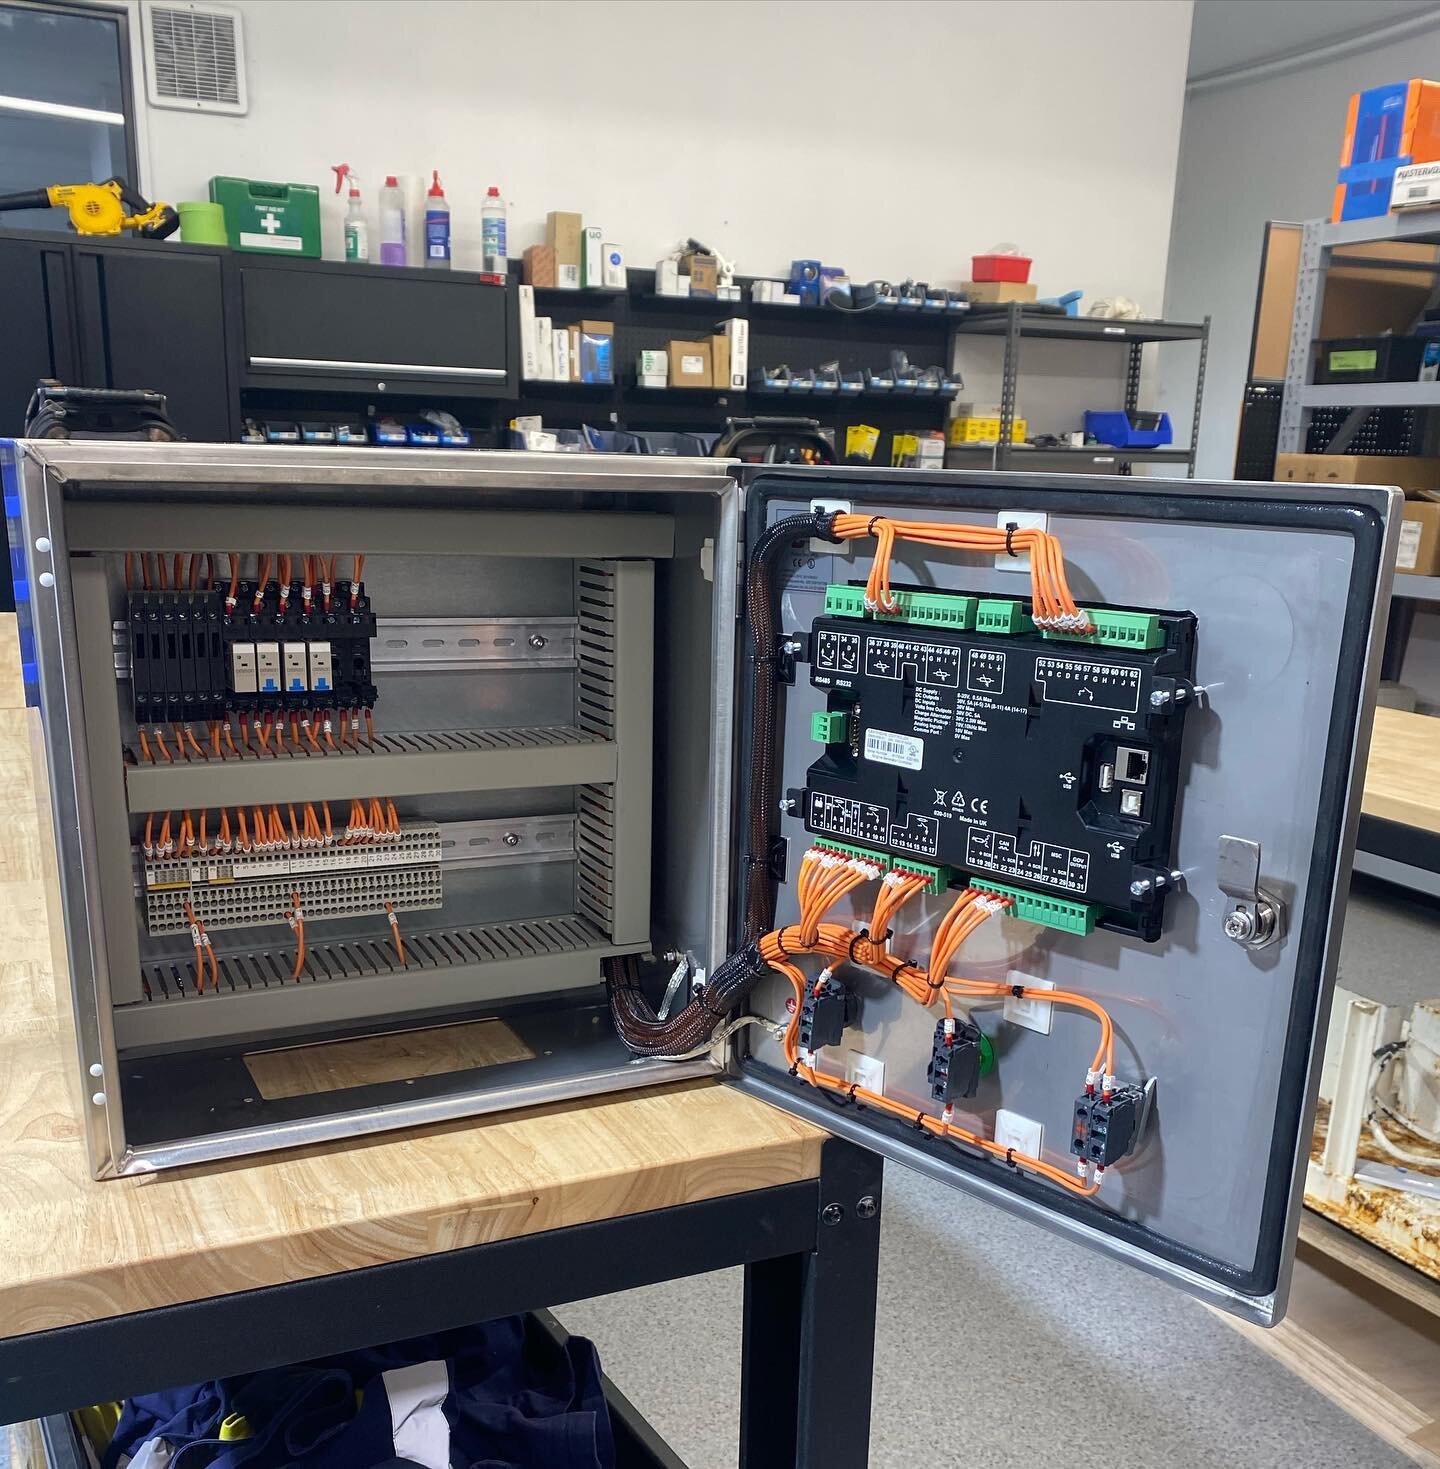 Here&rsquo;s one of our custom engine control panels. We complete the design, programming and manufacturing of these panels in house for various applications. This Deep Sea E800 unit can complete the following 
-Digital inputs 
-Digital outputs 
-PWM